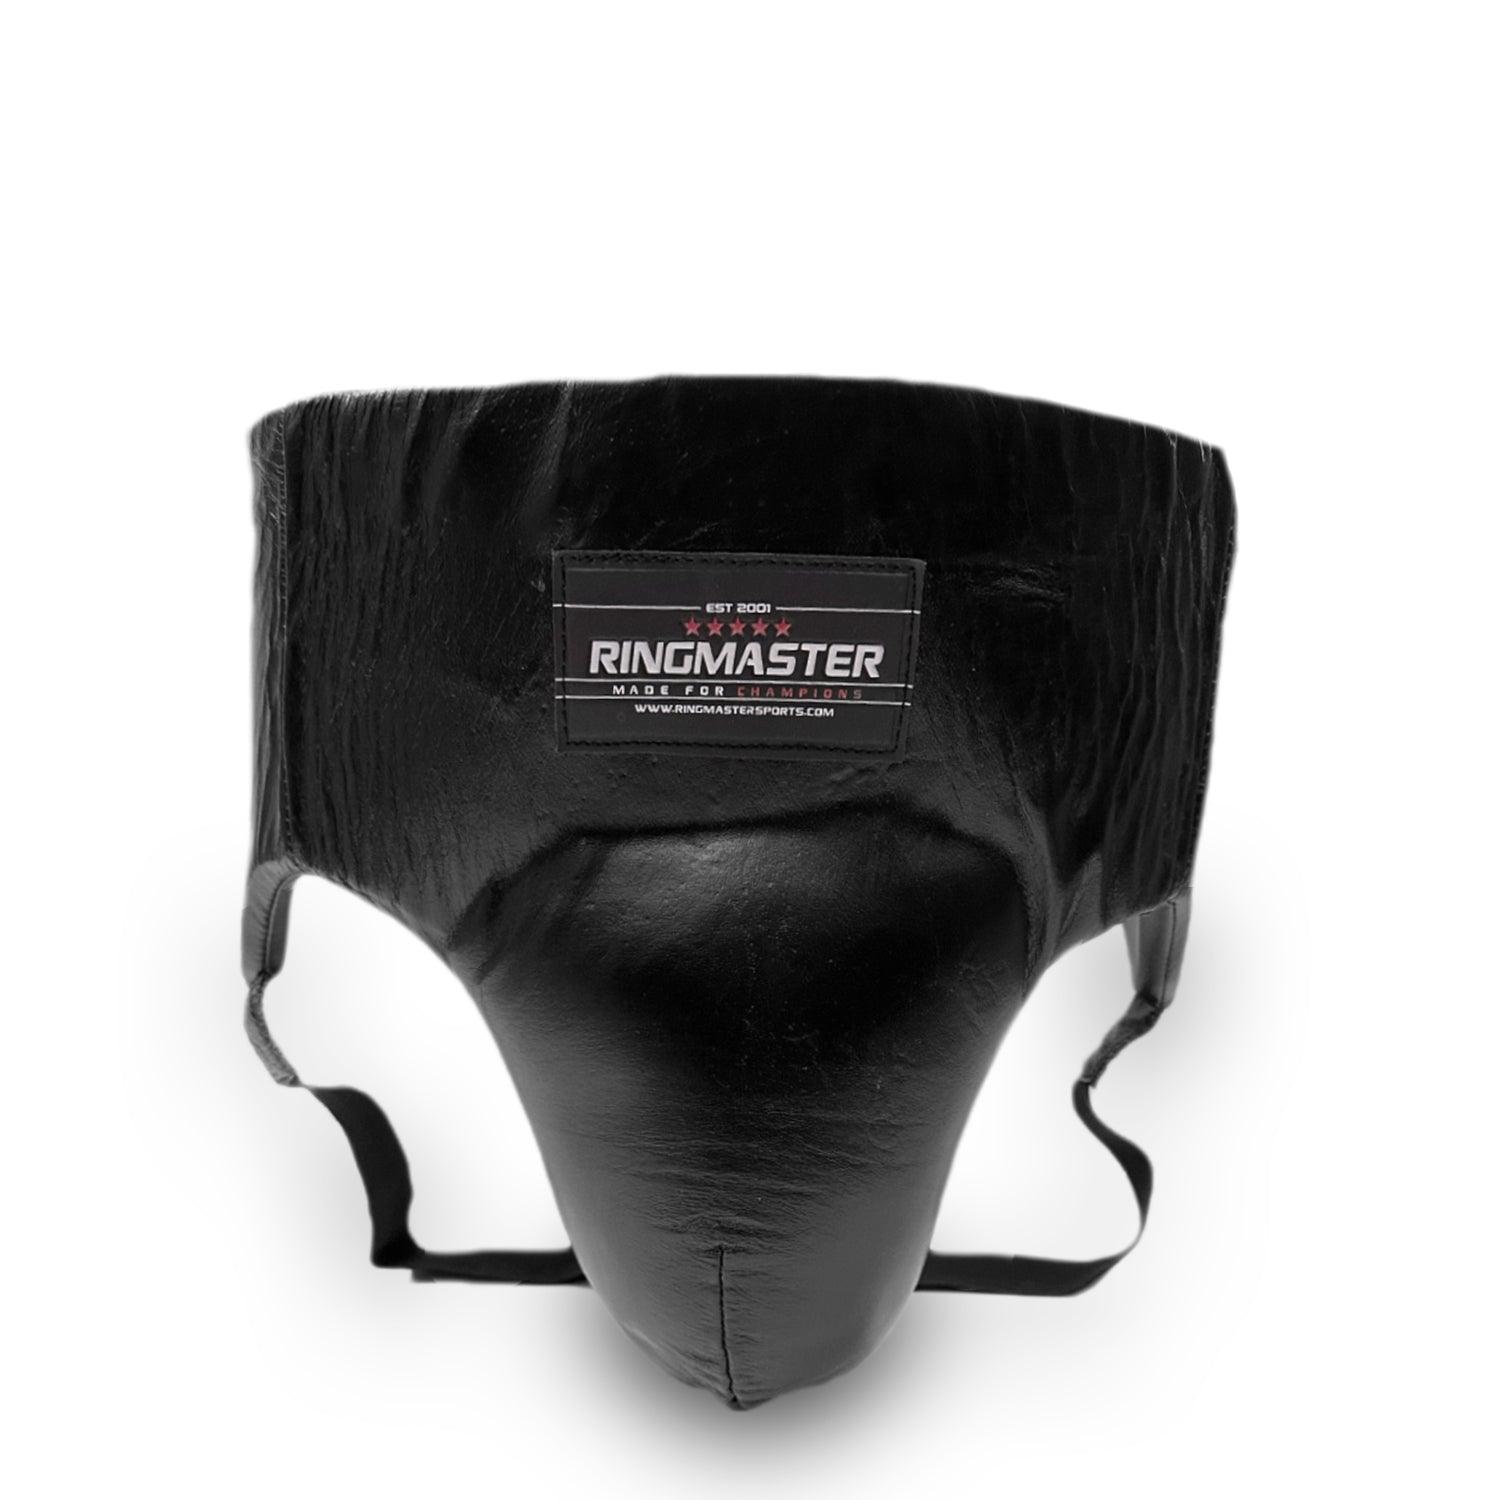 RingMaster Sports Groin Guard Genuine Leather Black - RINGMASTER SPORTS - Made For Champions